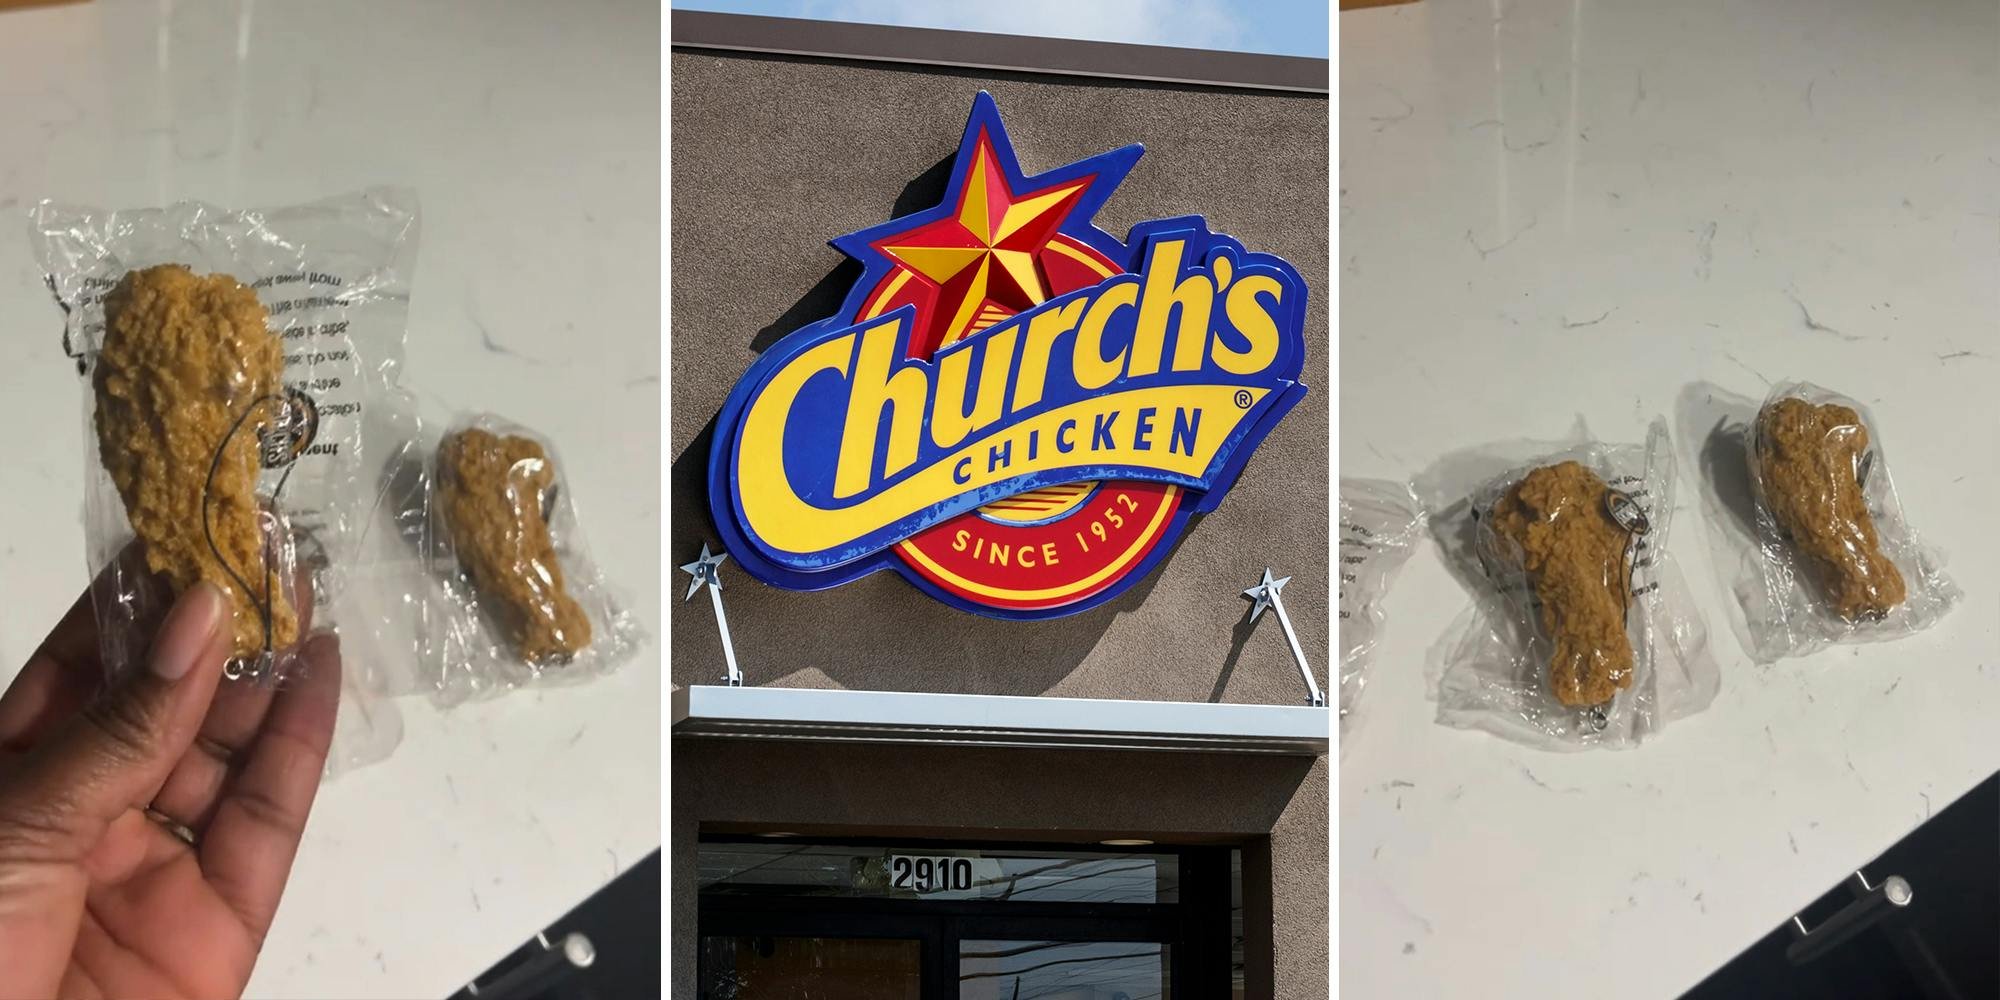 ‘I thought it was a sample’: Church’s Chicken hands out free prepackaged ‘drumsticks’ to customers. What are they?